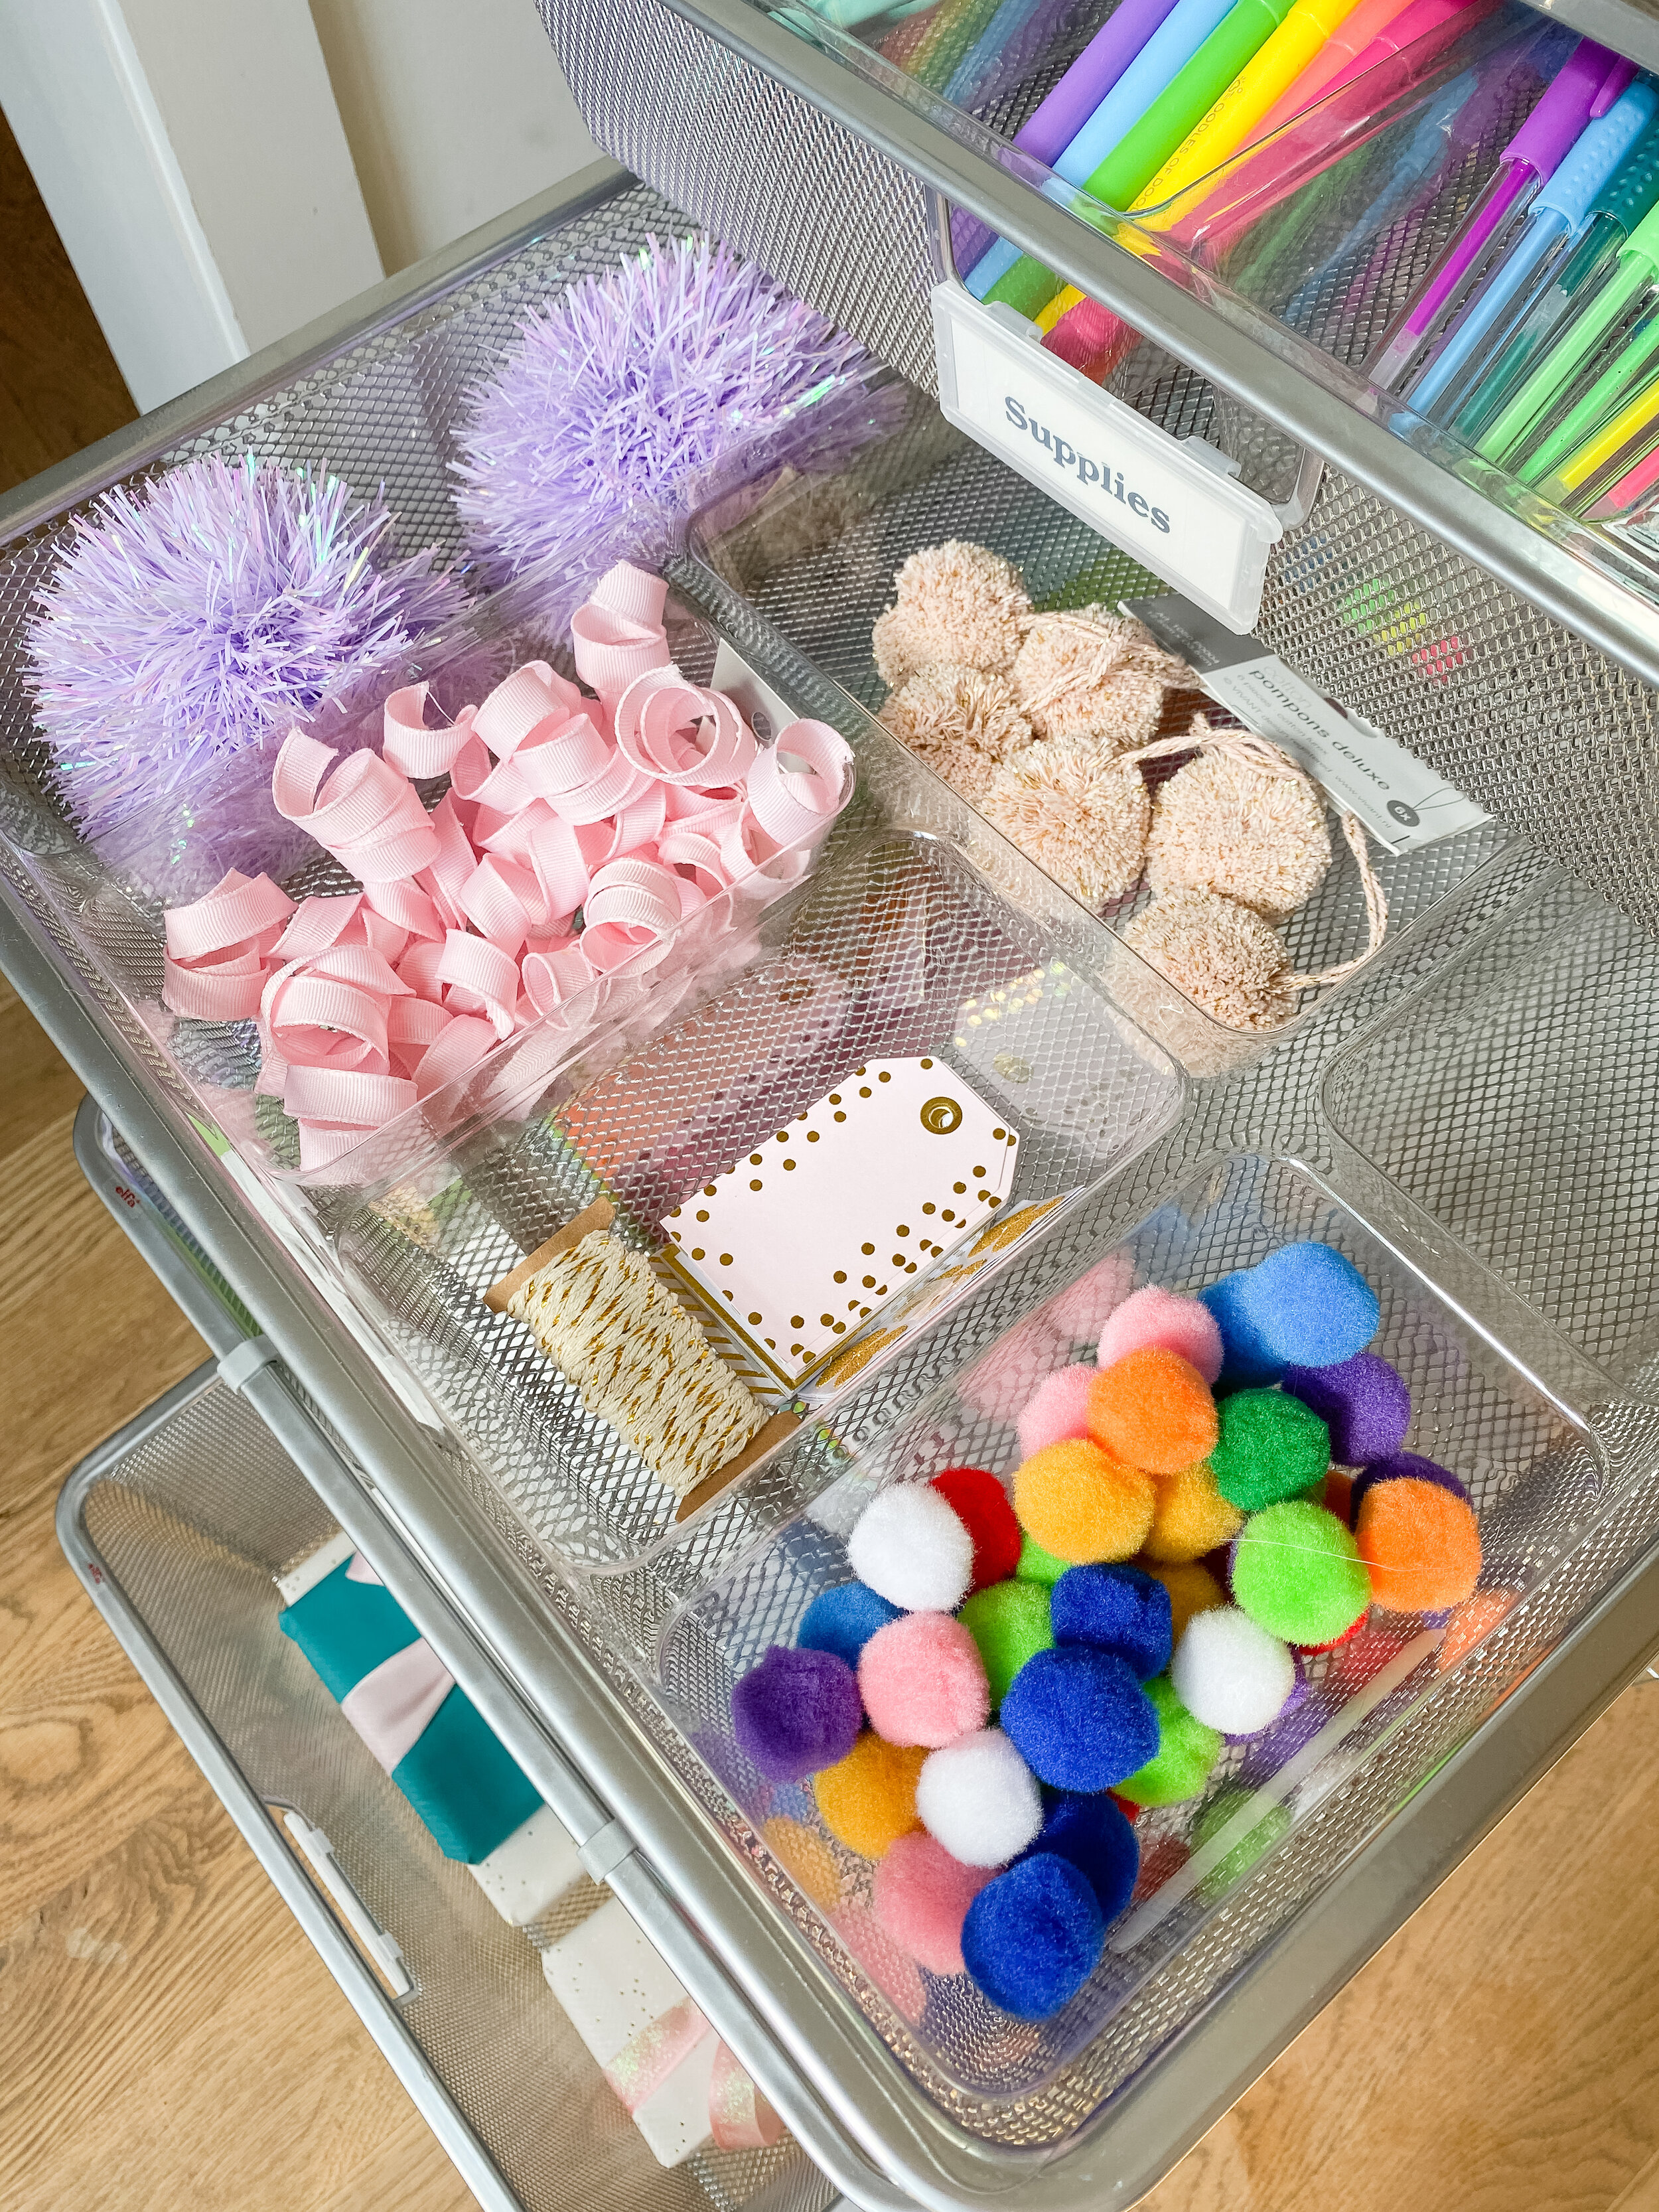 Organizing Craft Supplies in 5 Simple Steps